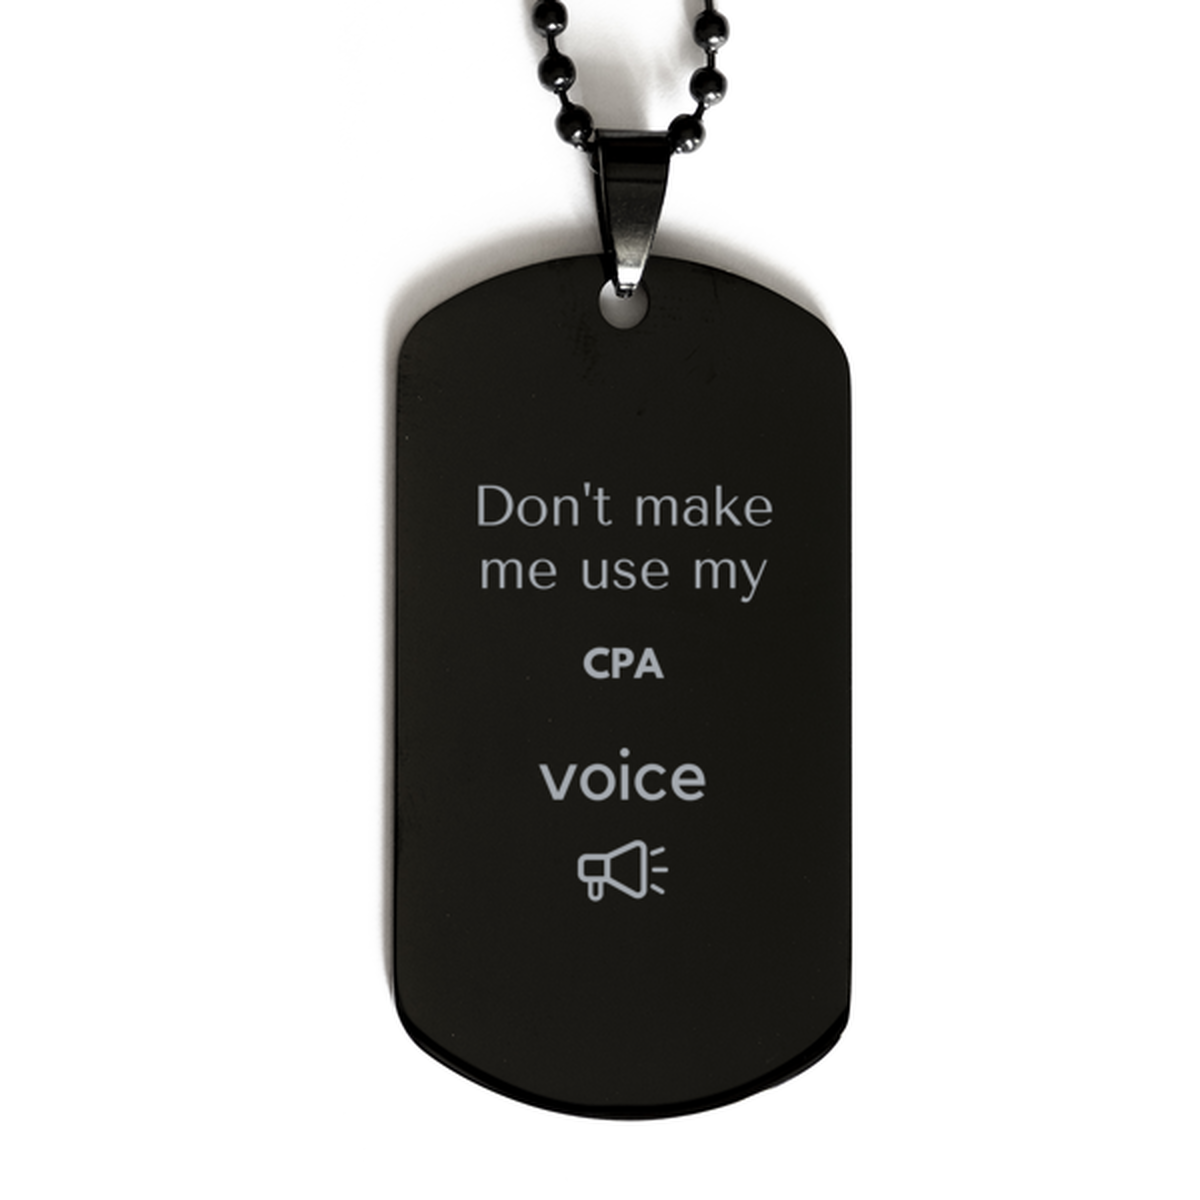 Don't make me use my CPA voice, Sarcasm CPA Gifts, Christmas CPA Black Dog Tag Birthday Unique Gifts For CPA Coworkers, Men, Women, Colleague, Friends